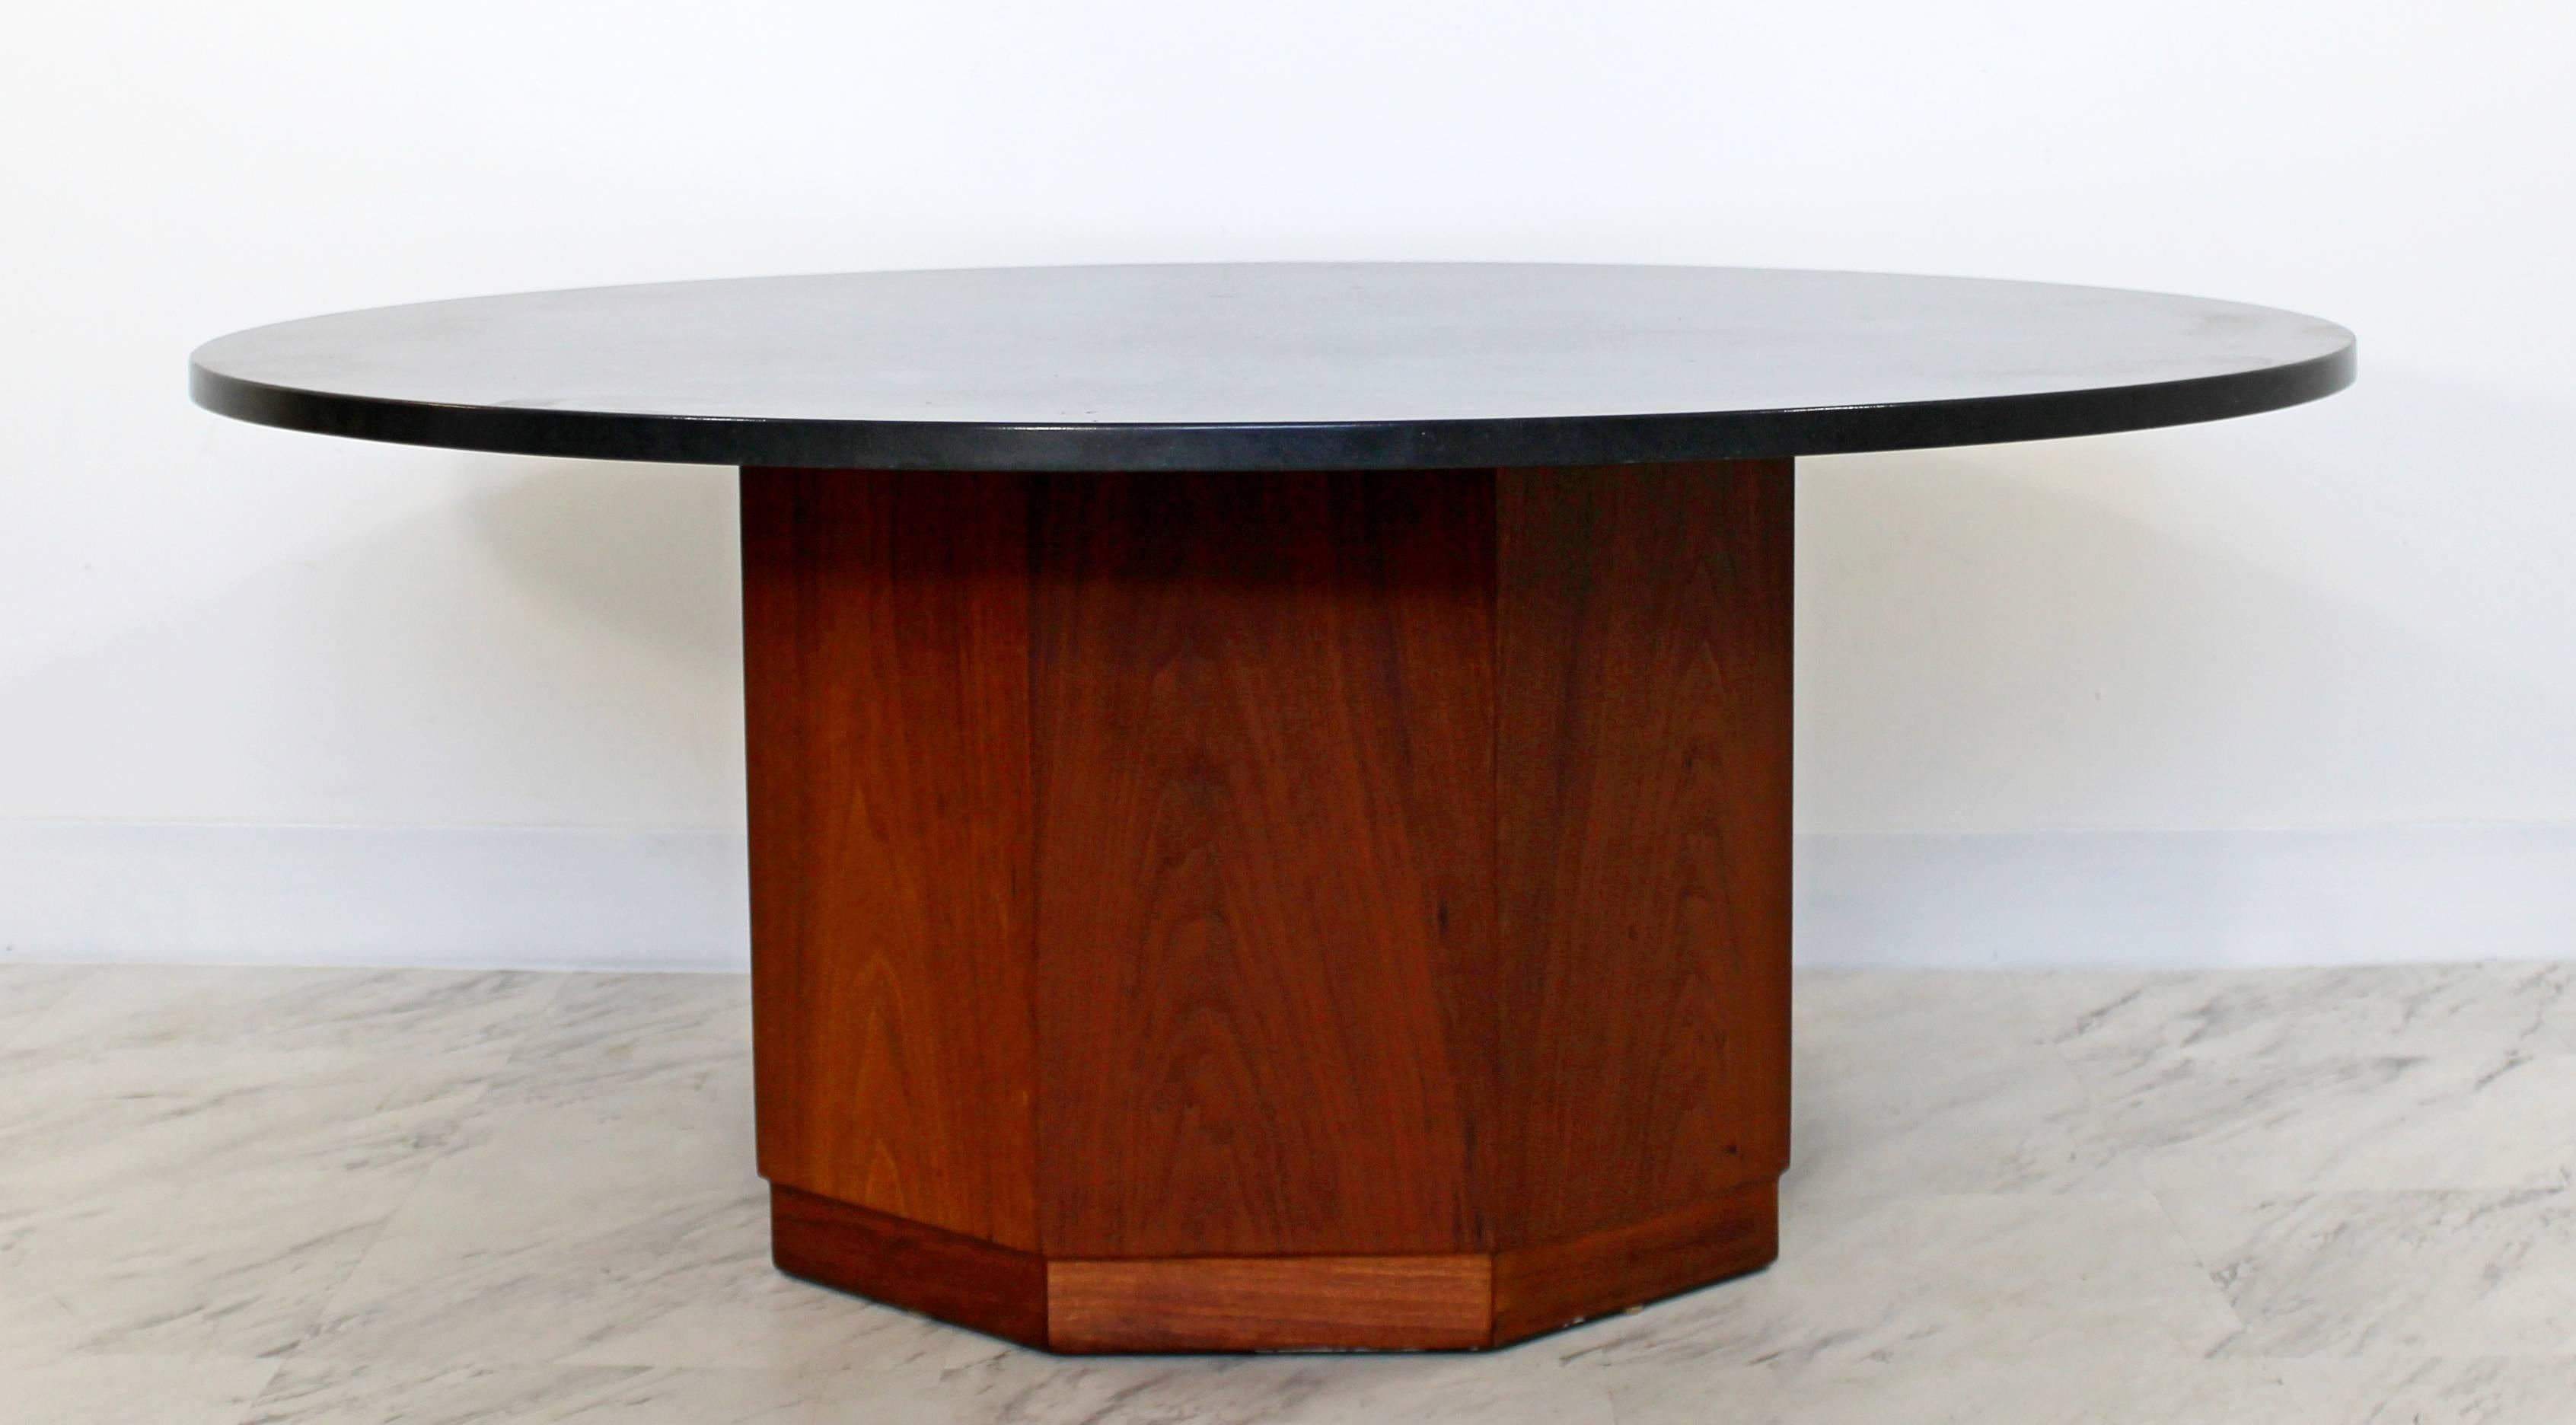 For your consideration is an iconic coffee table by renowned architect Fred Kemp, from the 1960s. The round slate top with octagonal walnut base is in good vintage condition. The dimensions are 42